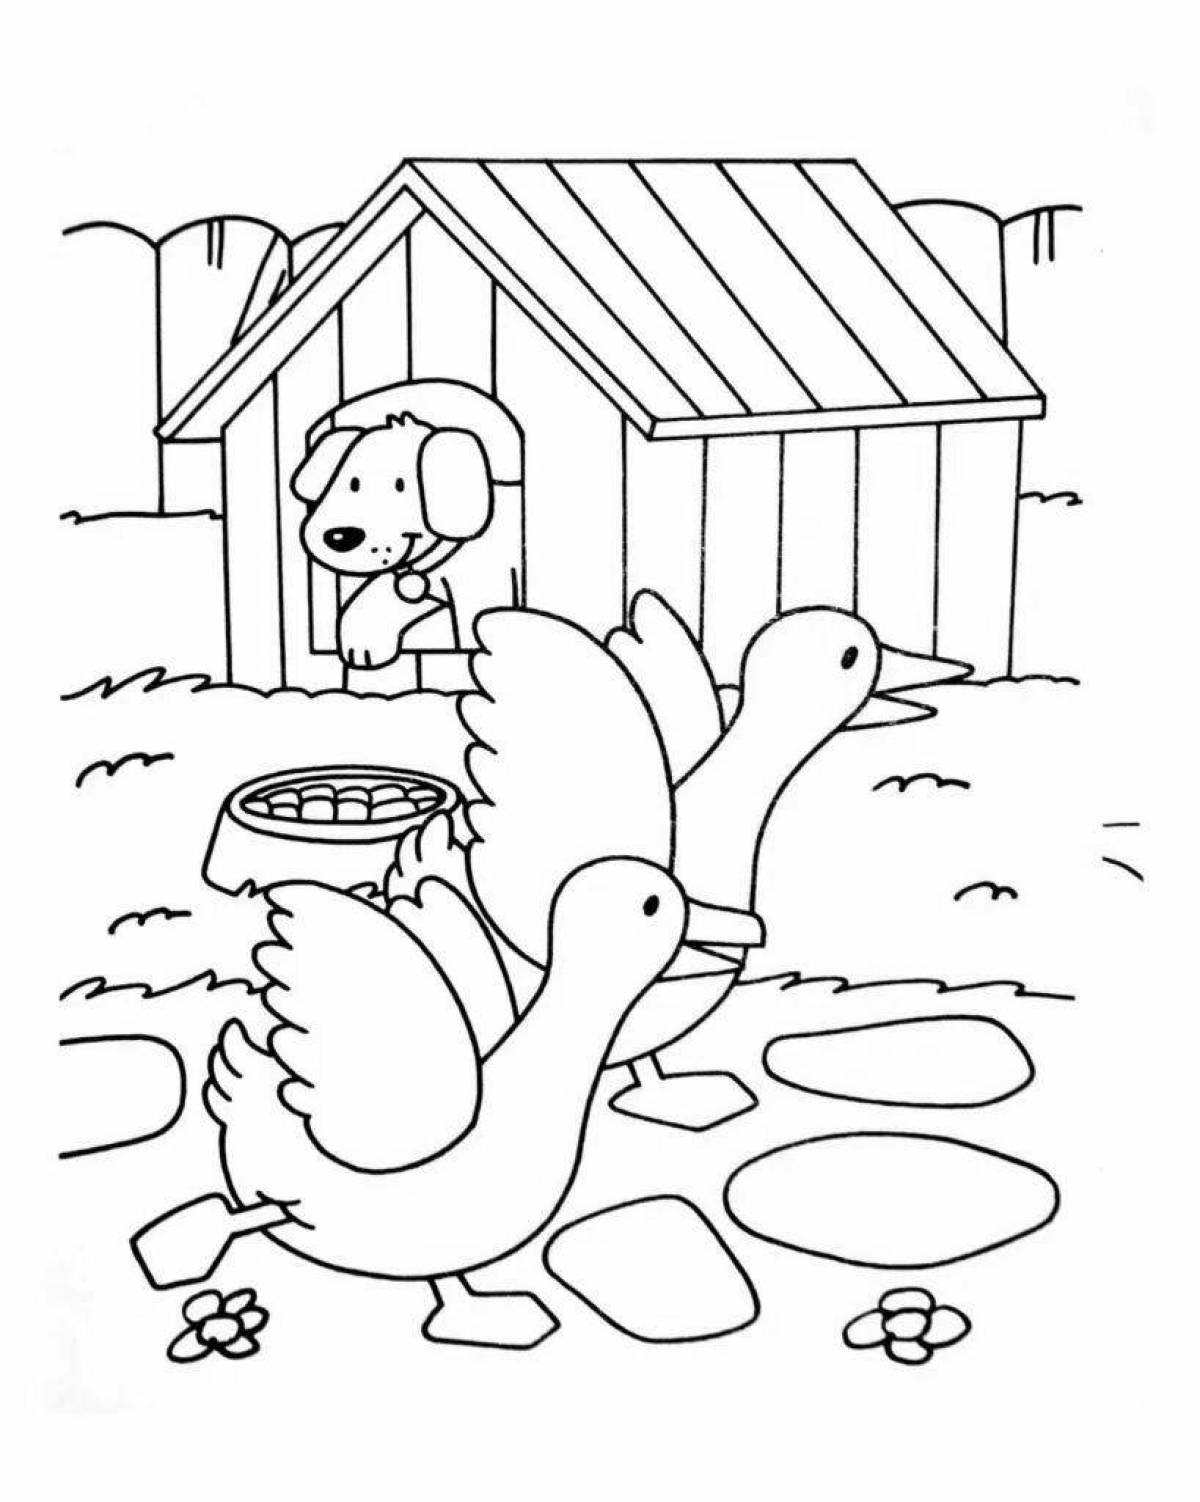 Inspirational farm coloring book for kids